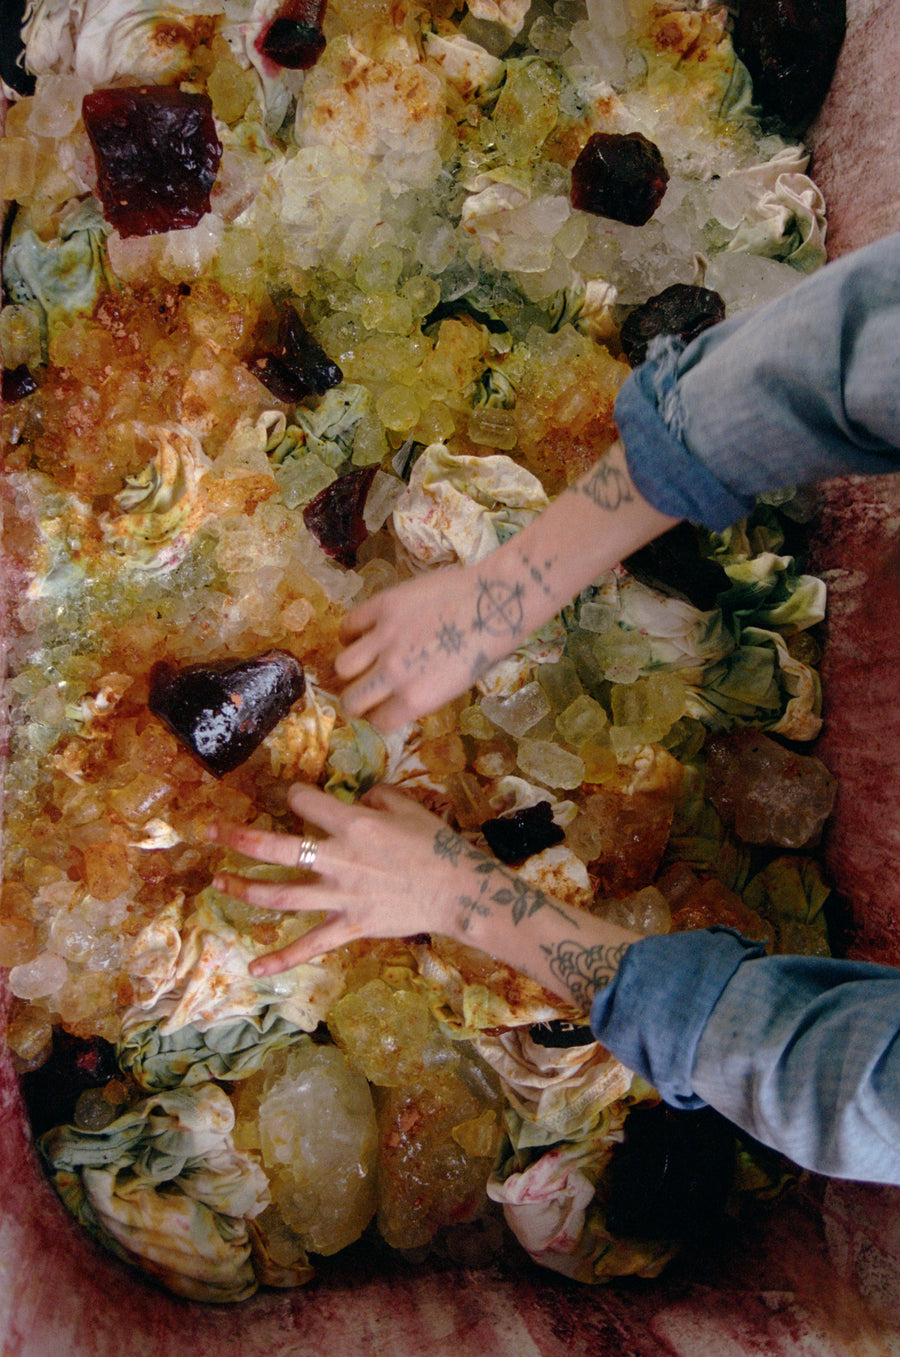 ICE DYEING with Natural Dyes - Vimeo Link